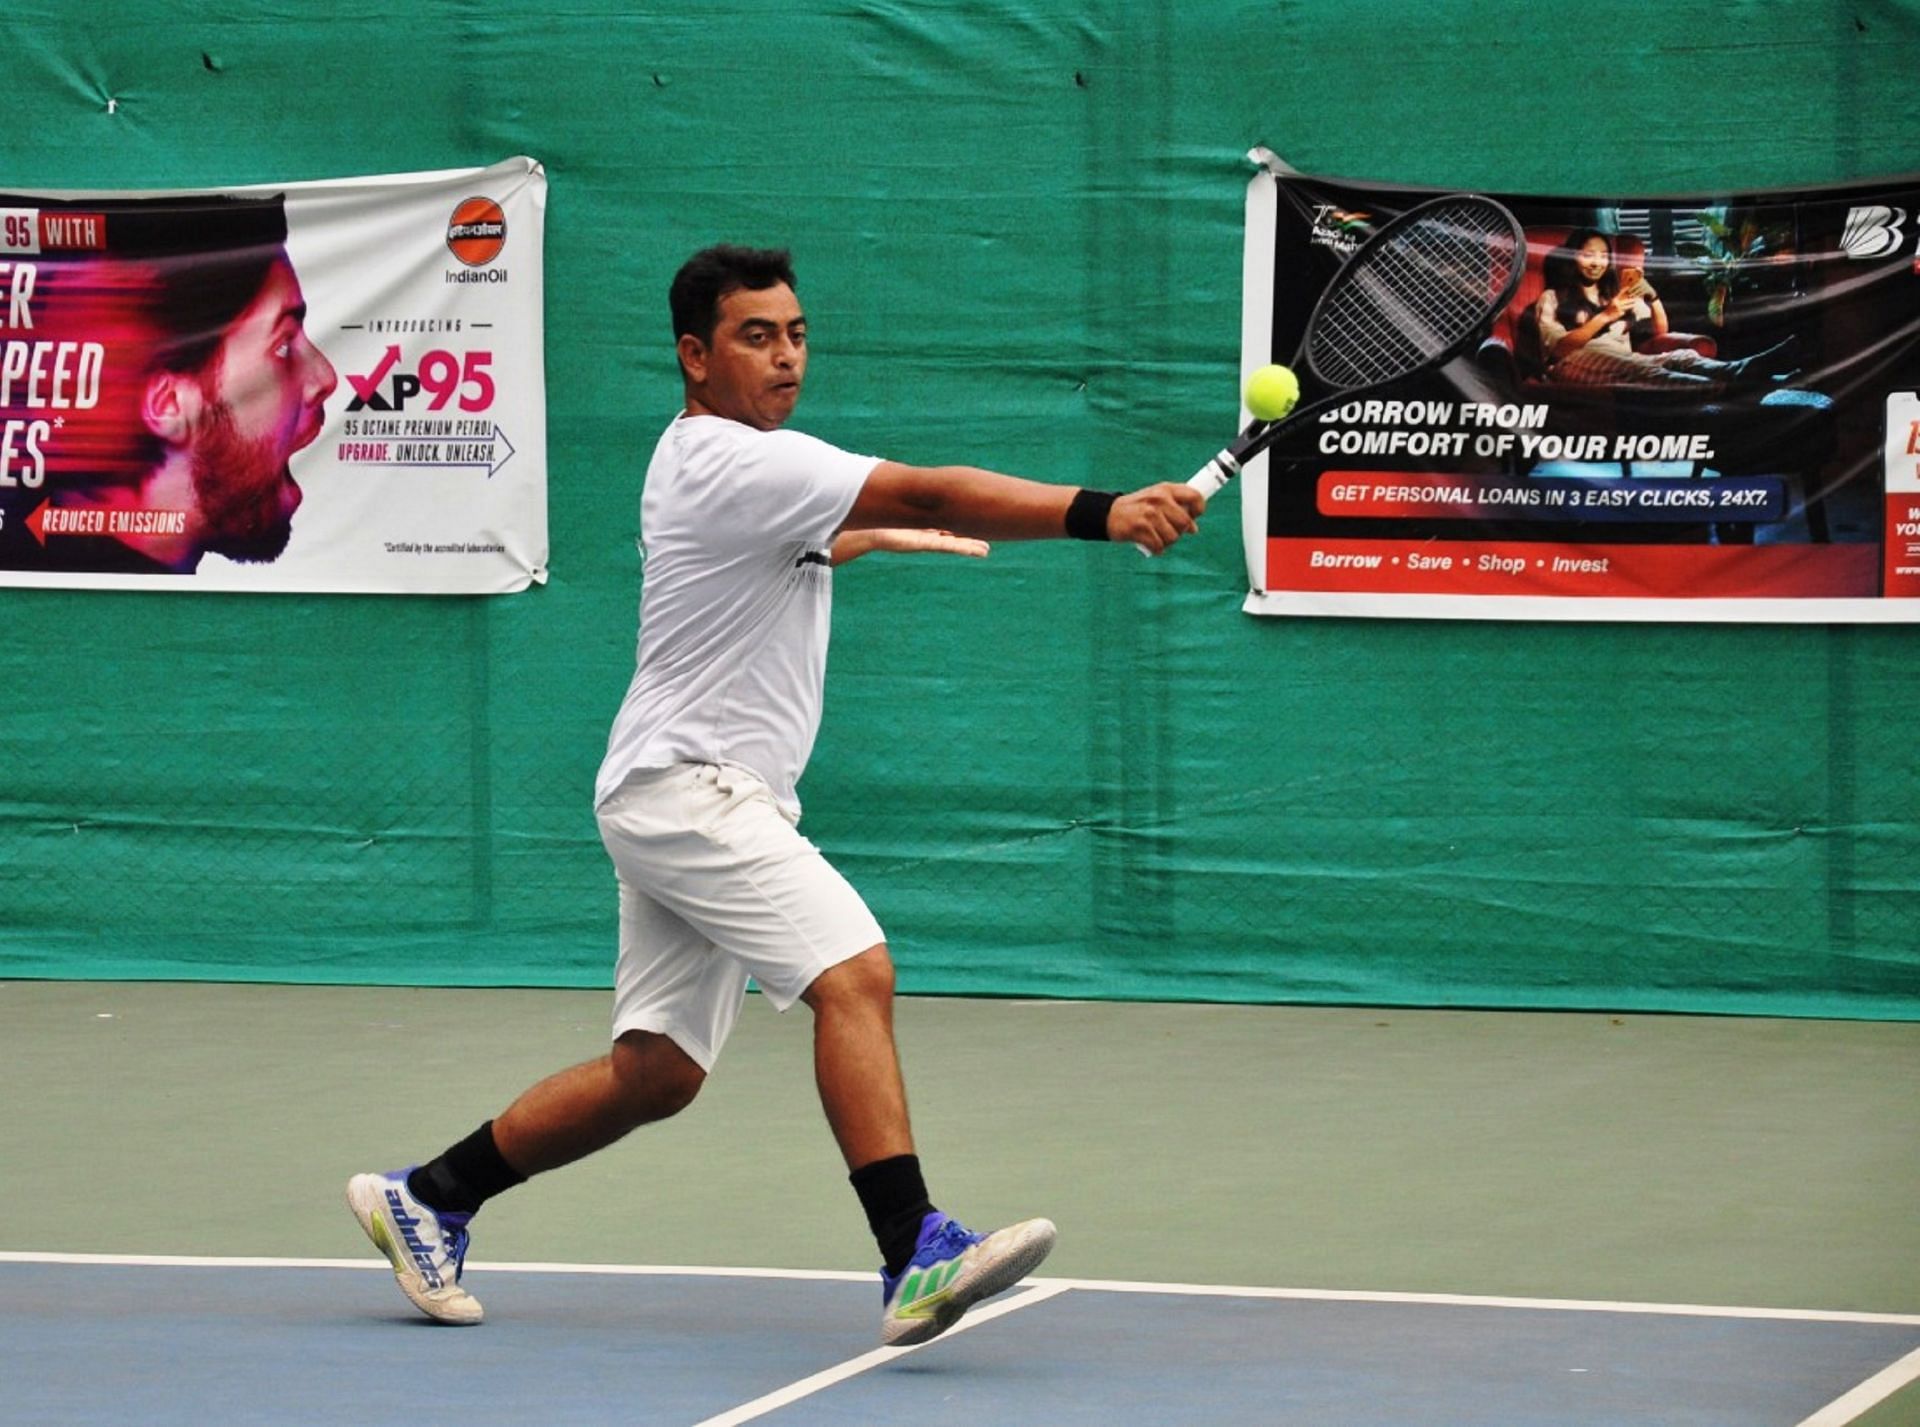 Unseeded Intikhab Ali upset top seed Aditya Khanna 6-3, 6-2 in the Jayant Roy Memorial ITF Mumbai Tennis tournament at the MSLTA courts on Sunday. (Pic credit: MSLTA)